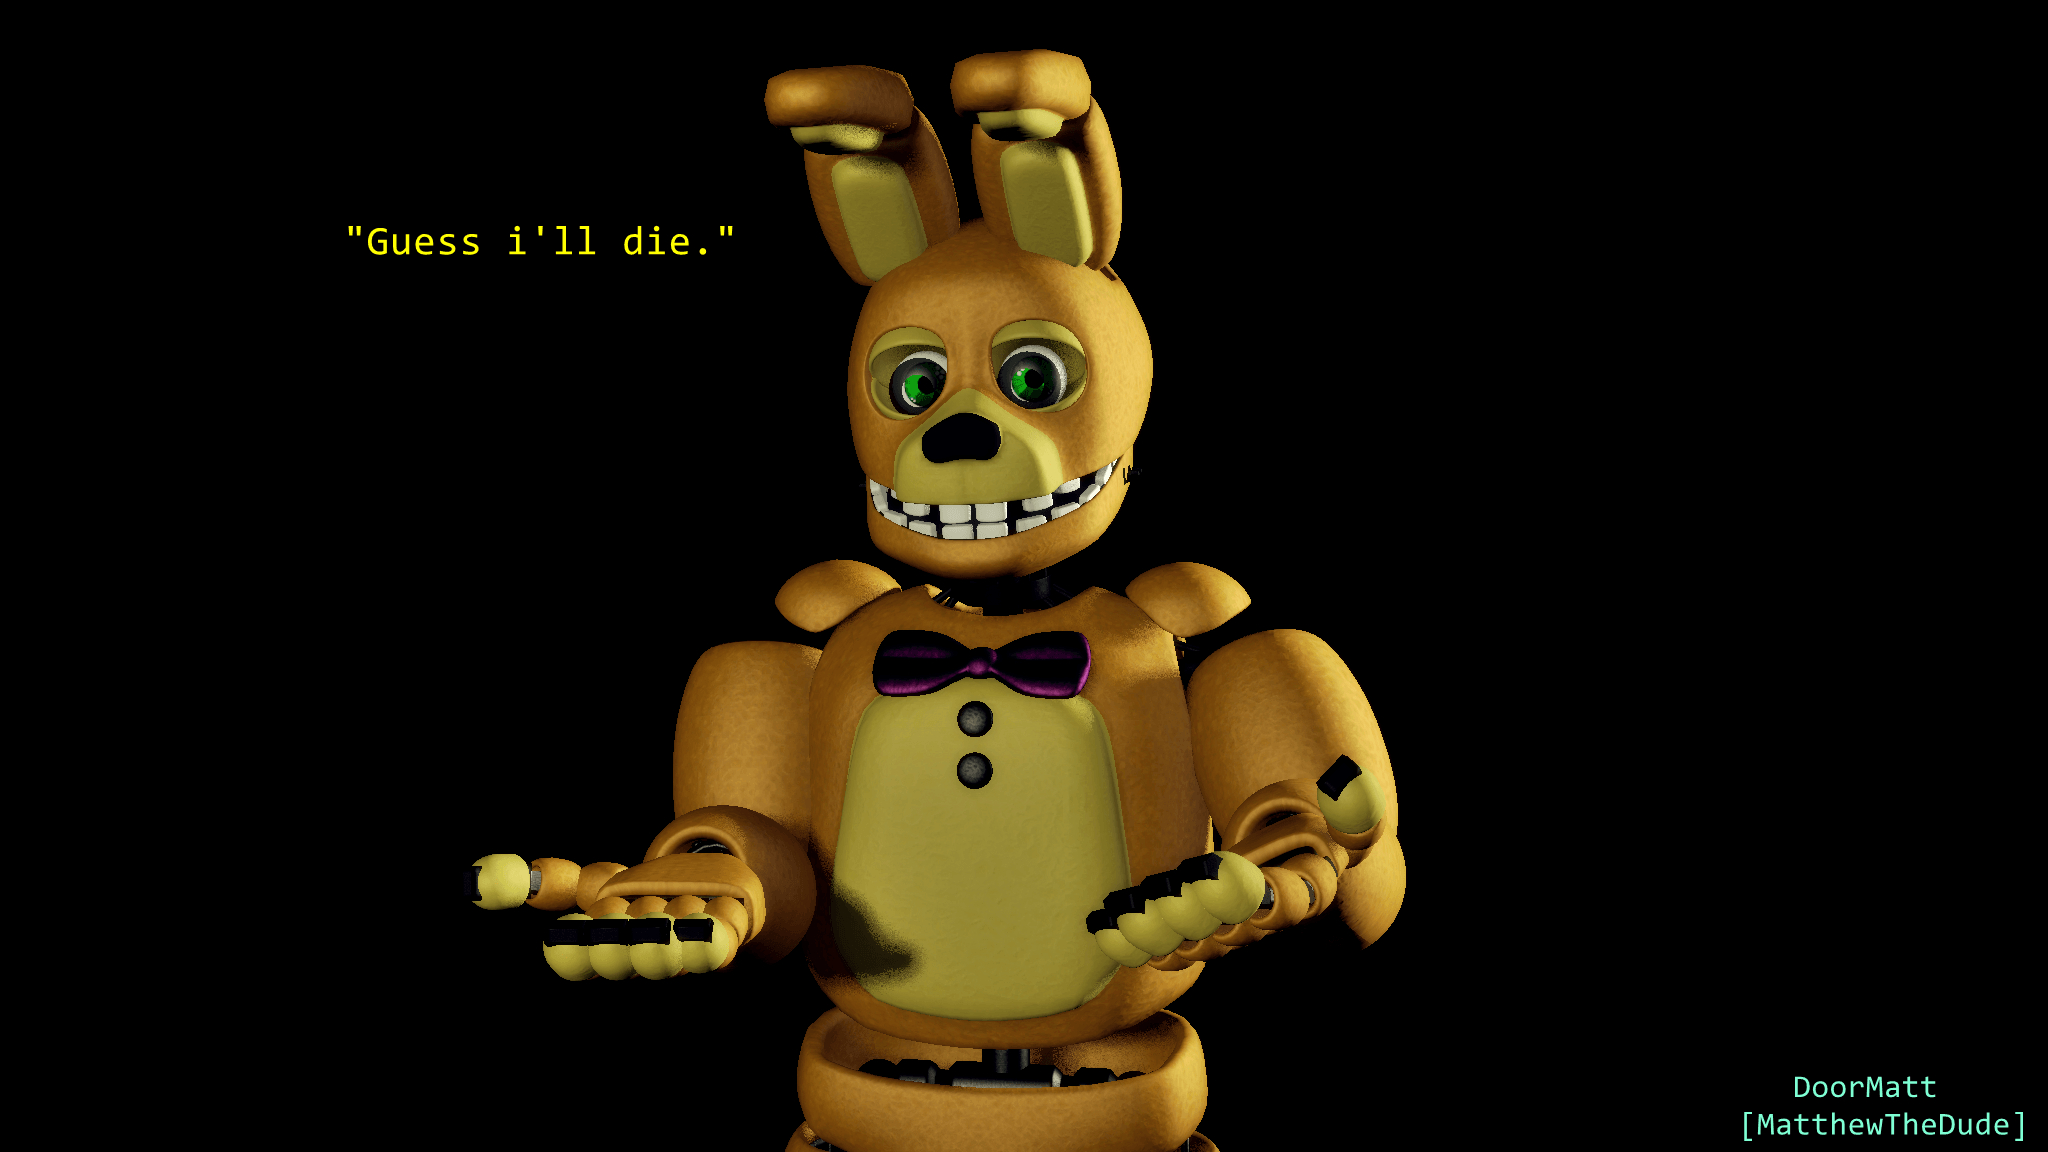 Fredbear And Springbonnie Wallpapers - Wallpaper Cave.